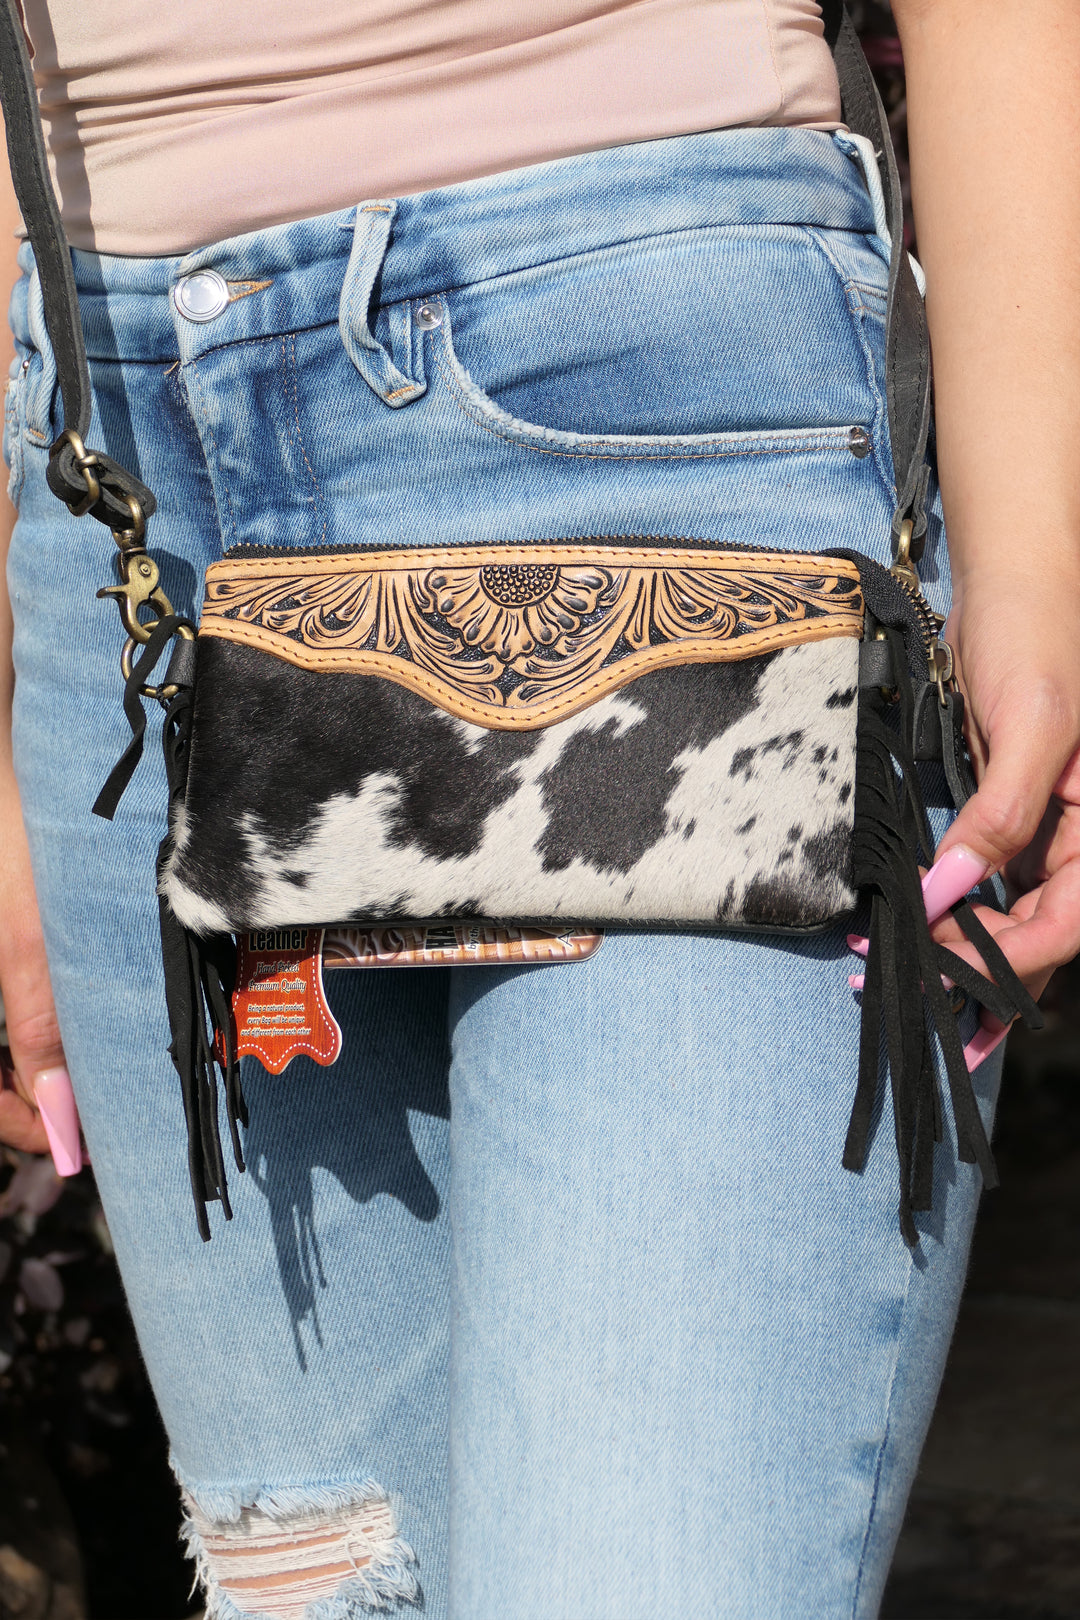 American Darling - Tooled Leather Black and White Cowhide Crossbody with Fringes